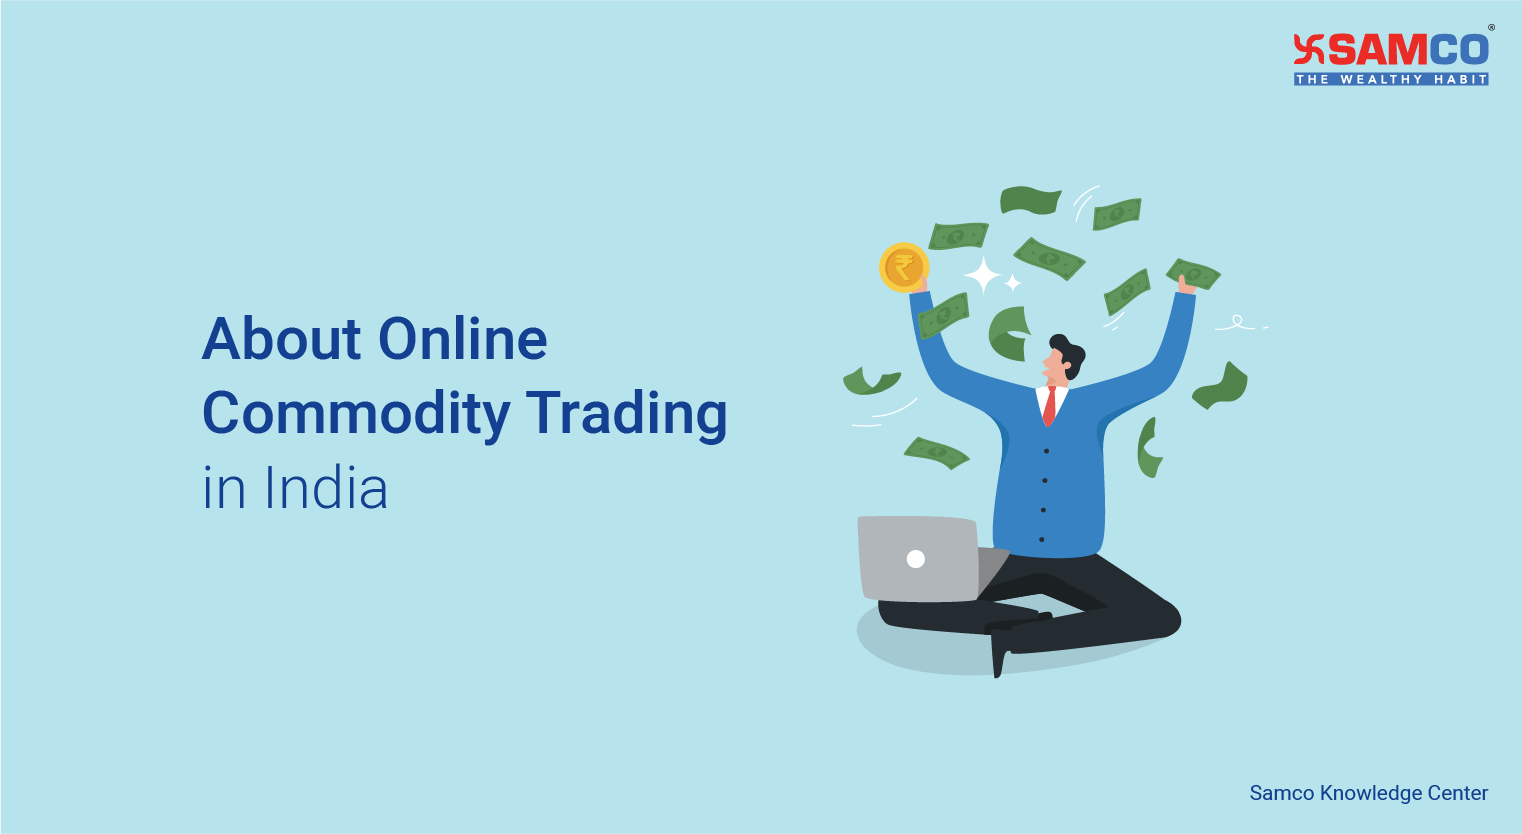 About Online Commodity Trading in India